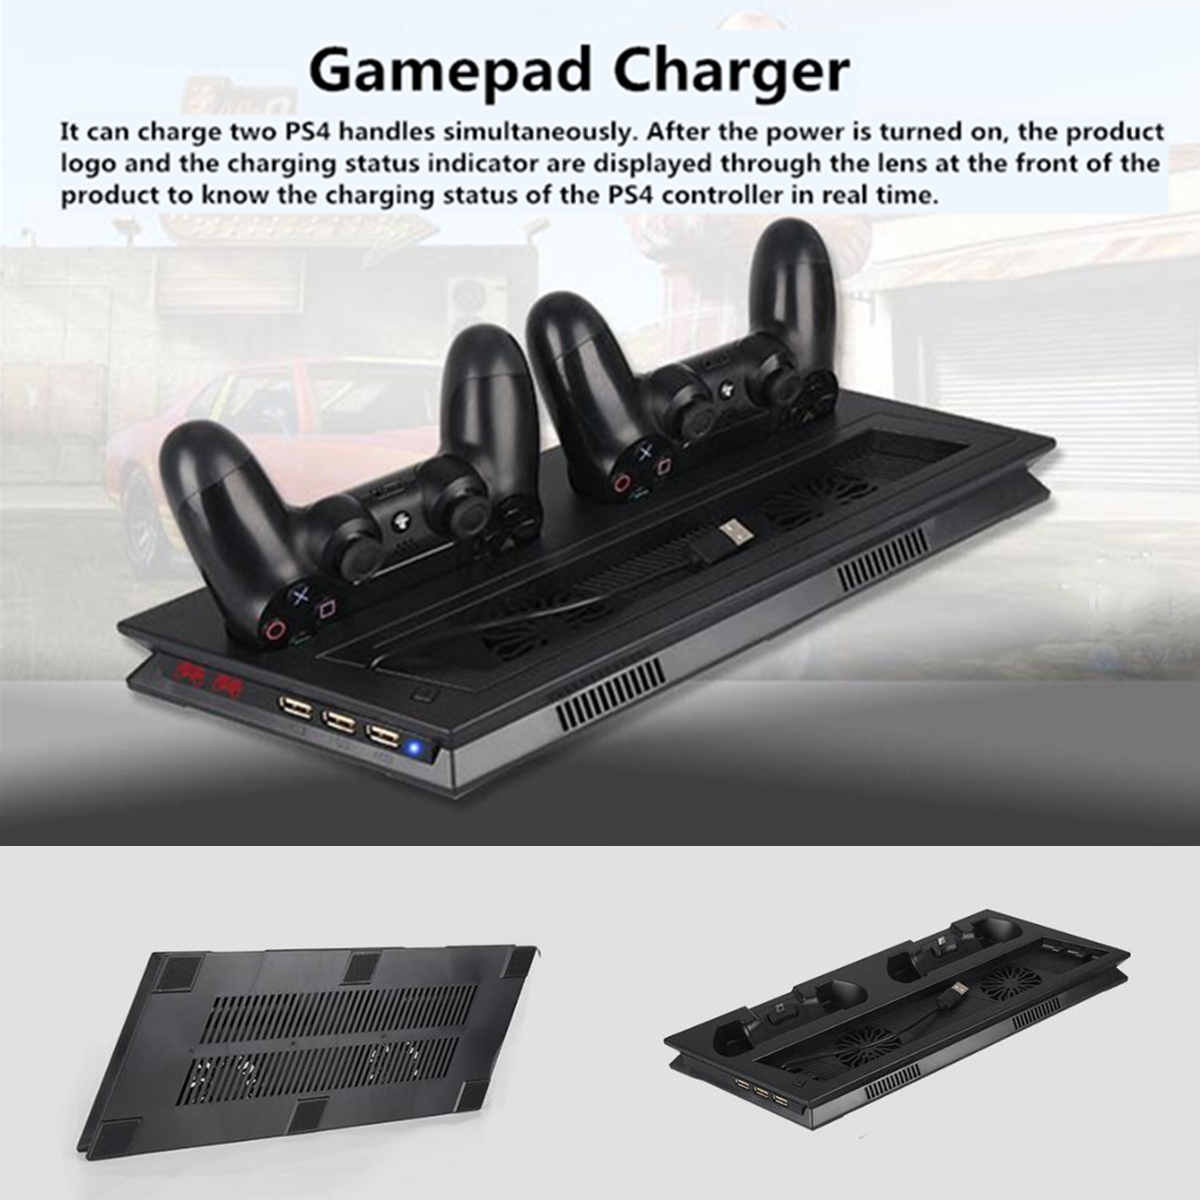 LED Charger Station Stand Charging Dock Cooling Fan for Sony Playstation 4 PS4 PRO Slim Game Console Gamepad 36